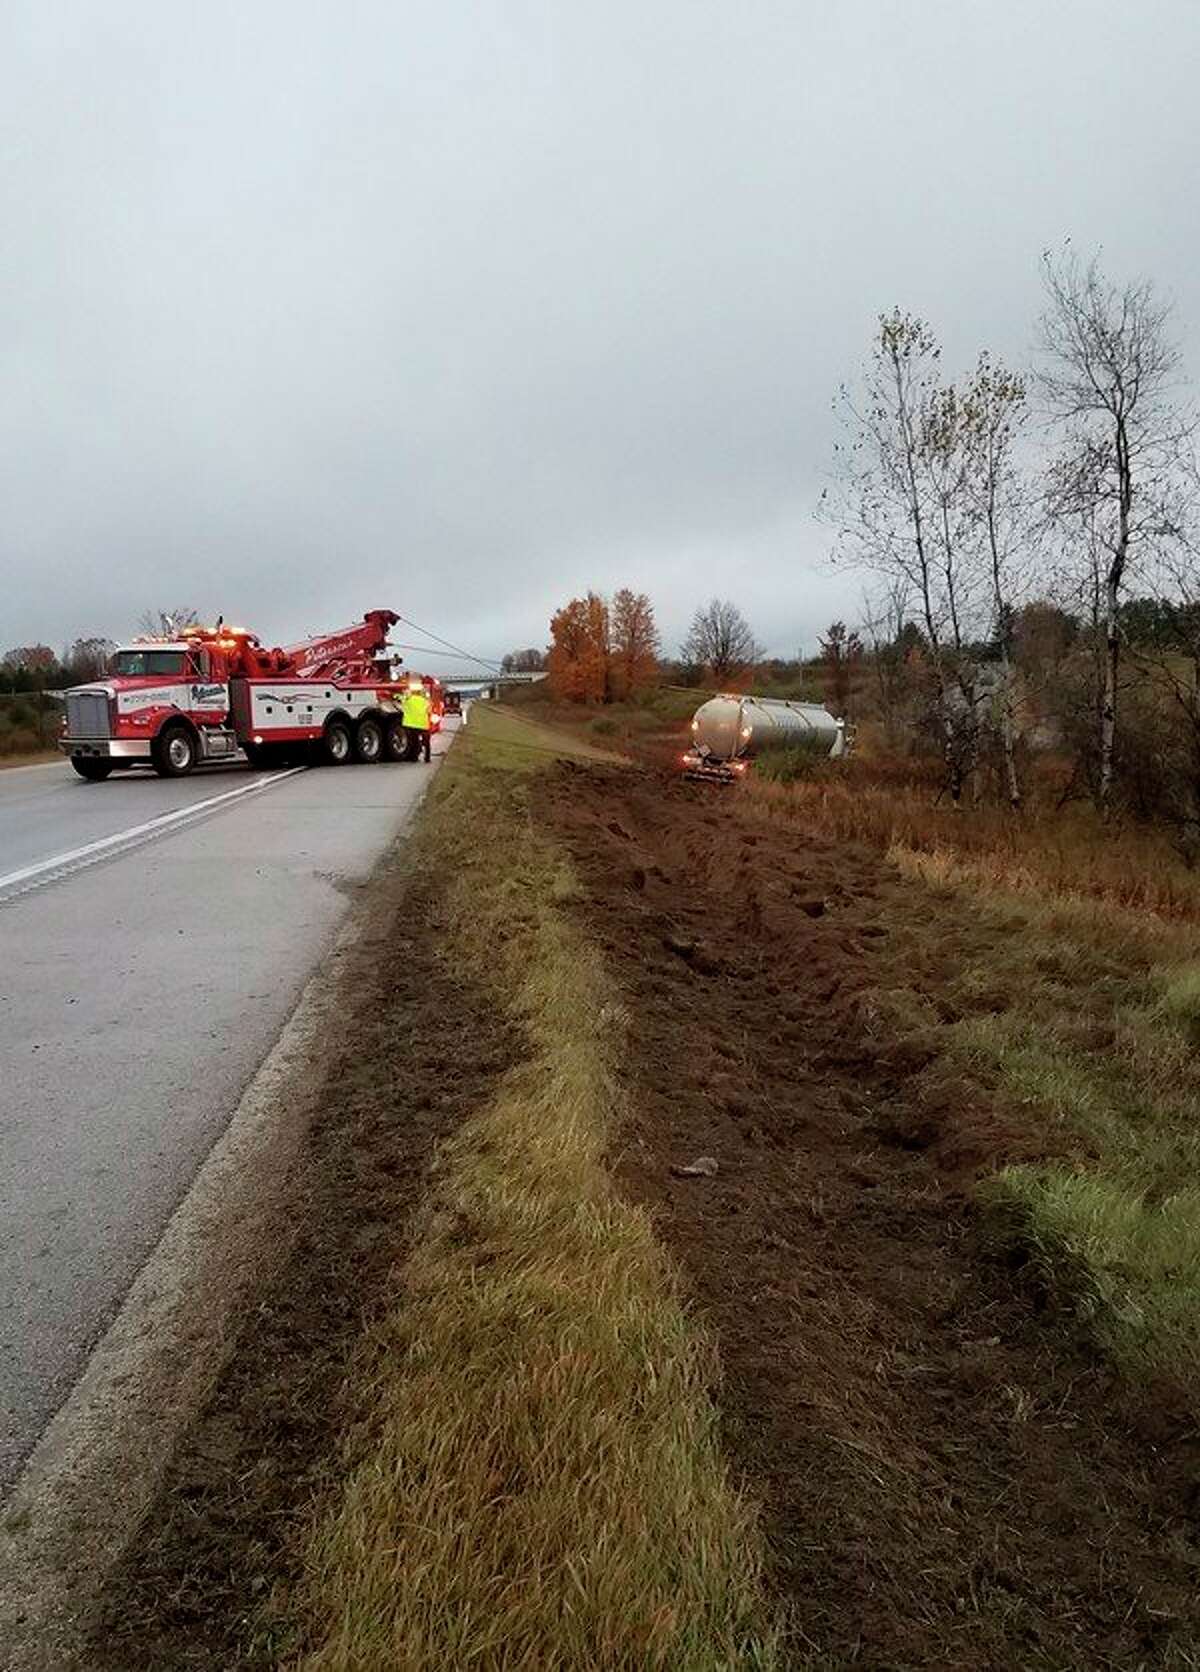 Deputies with the Osceola County Sheriff's Office responded to a report of a semi-truck hauling a fuel tanker in the ditch on northbound U.S. 131 south of 18 Mile Road in LeRoy Township Tuesday morning. An investigation into the incident is compete and alcohol is not believed to be a factor, police said. (Courtesy photo)